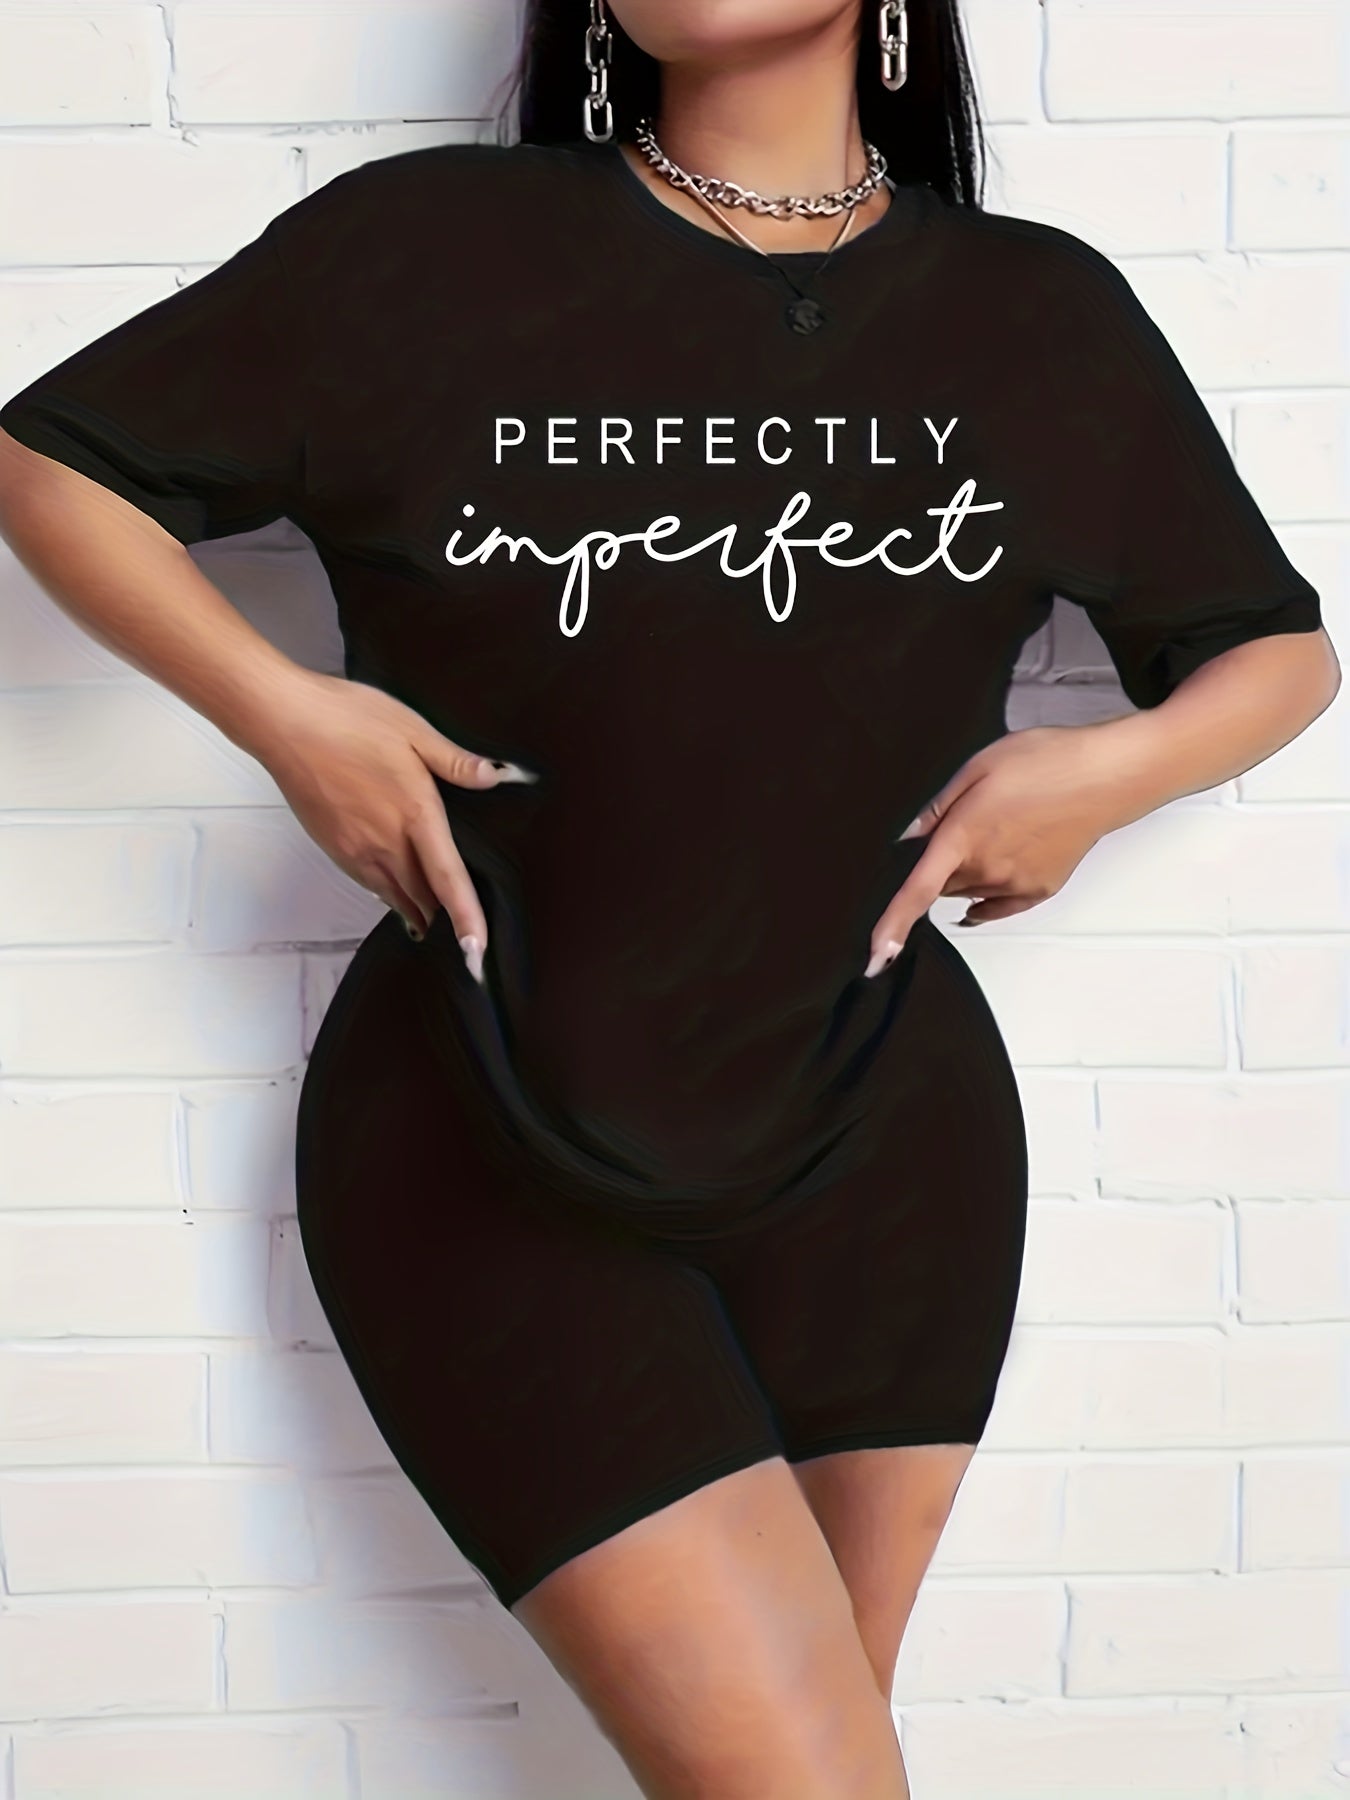 Perfectly Imperfect Plus Size Women's Christian Casual Outfit claimedbygoddesigns